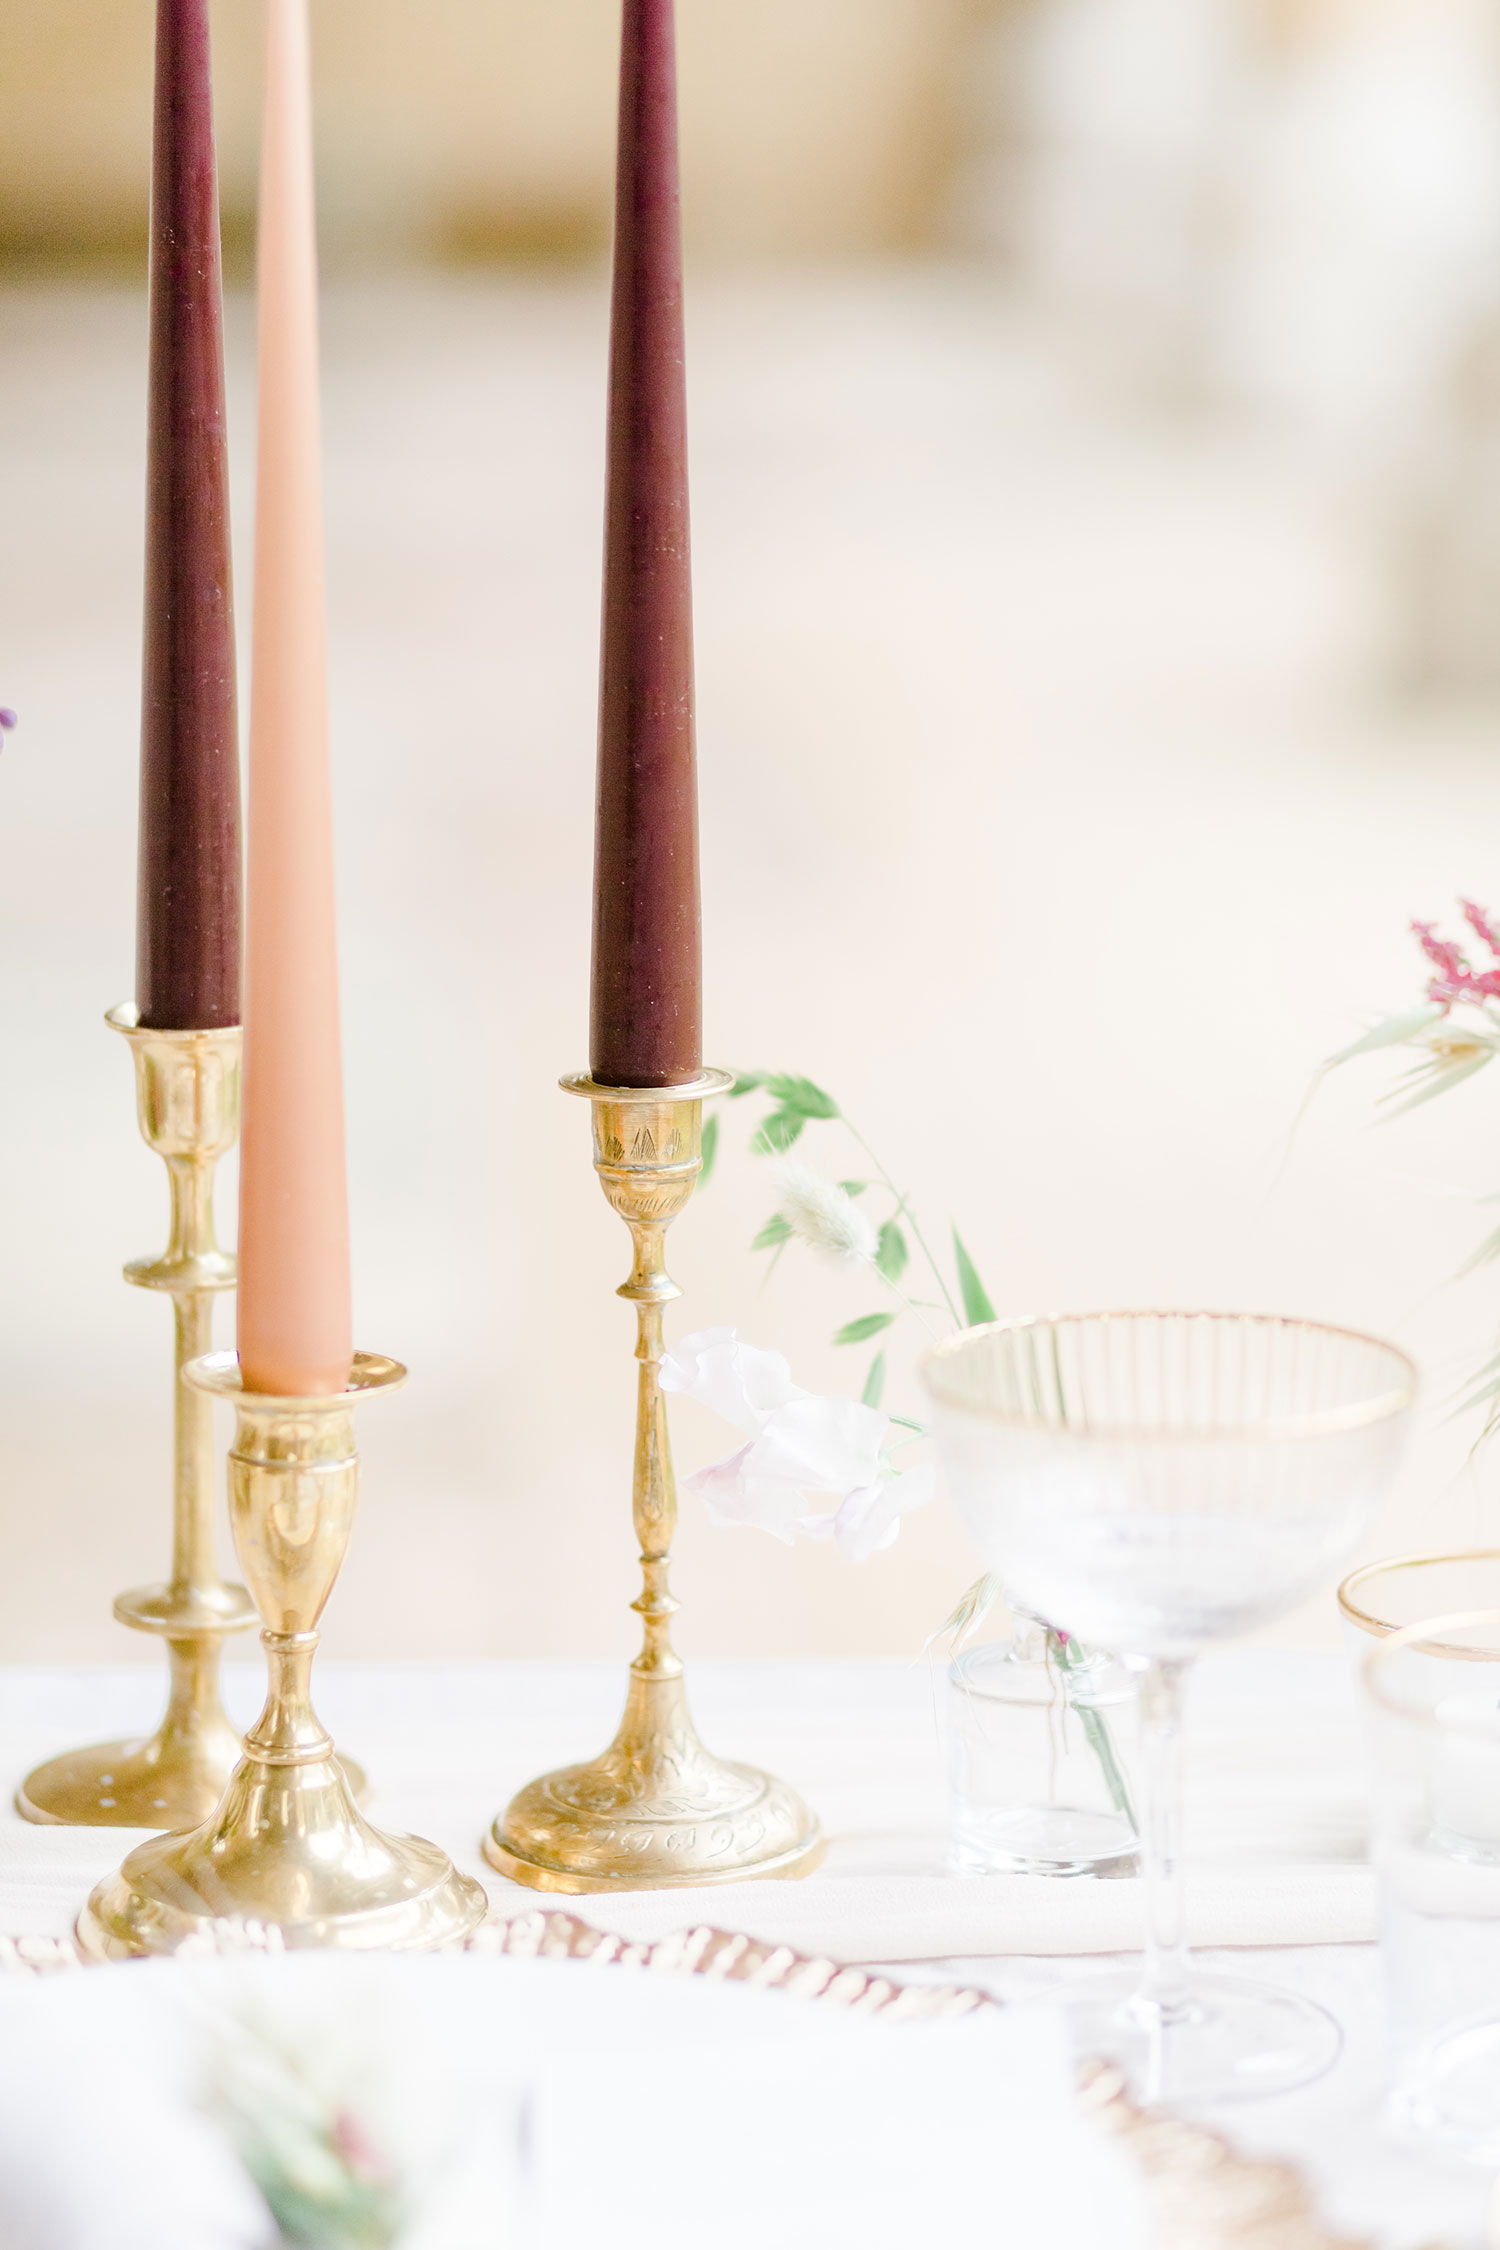 https://www.thewhiteemporium.co.uk/wp-content/uploads/2022/05/the-white-emporium-hire-collection-Brass-Candle-Stick.jpg